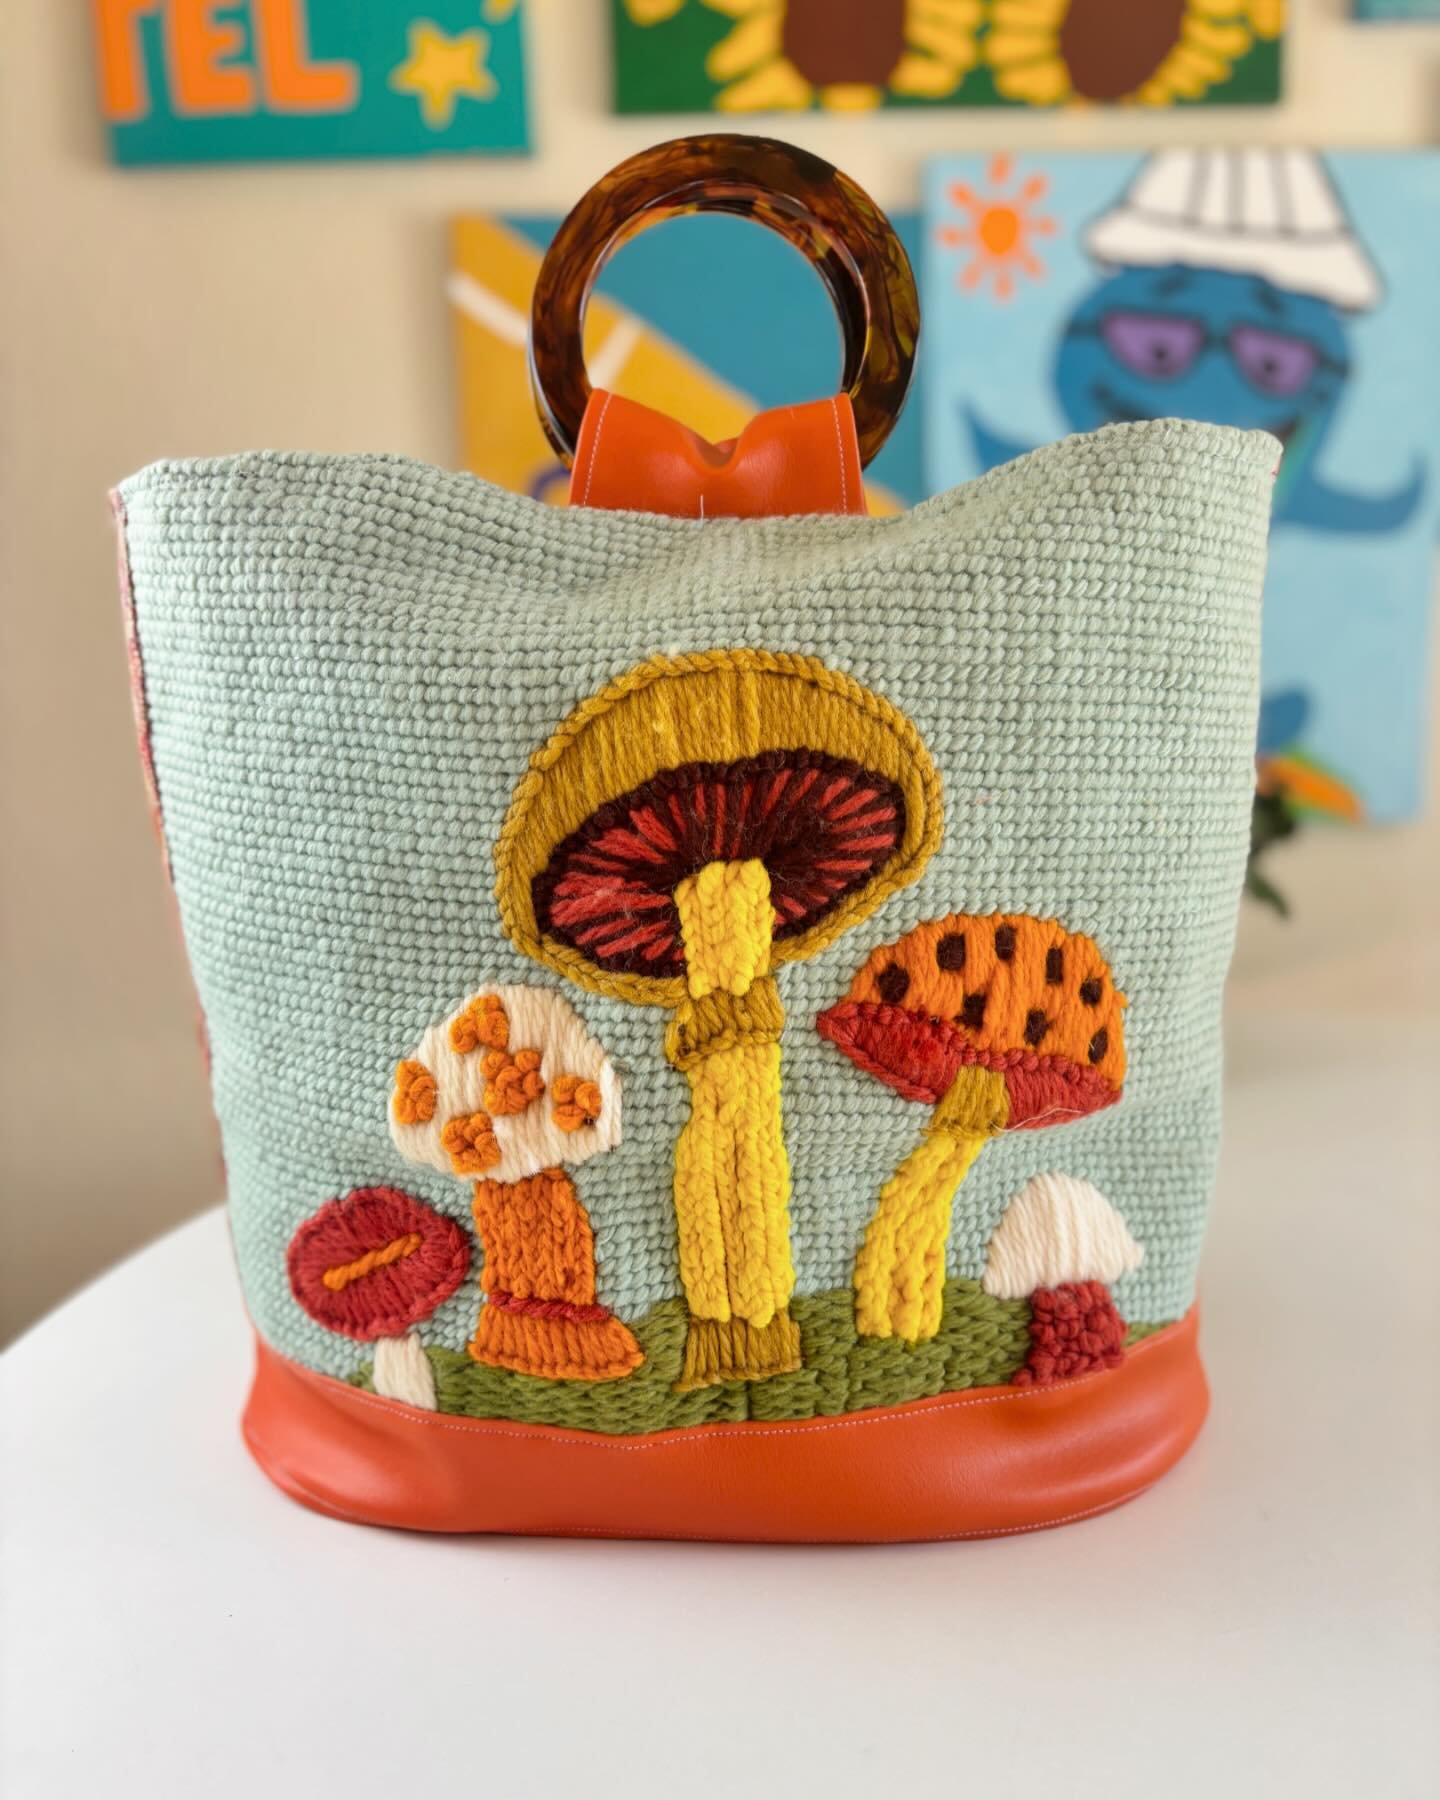 Happy Saturday! Vintage mushroom needlepoint transformed into new Chelle Summer Take Everywhere Bag. And I was able to pair it with a fun vintage vinyl upholstery fabric. Find it in the boutique at www.chellesummer.com.

#vintageneedlepoint #mushroom